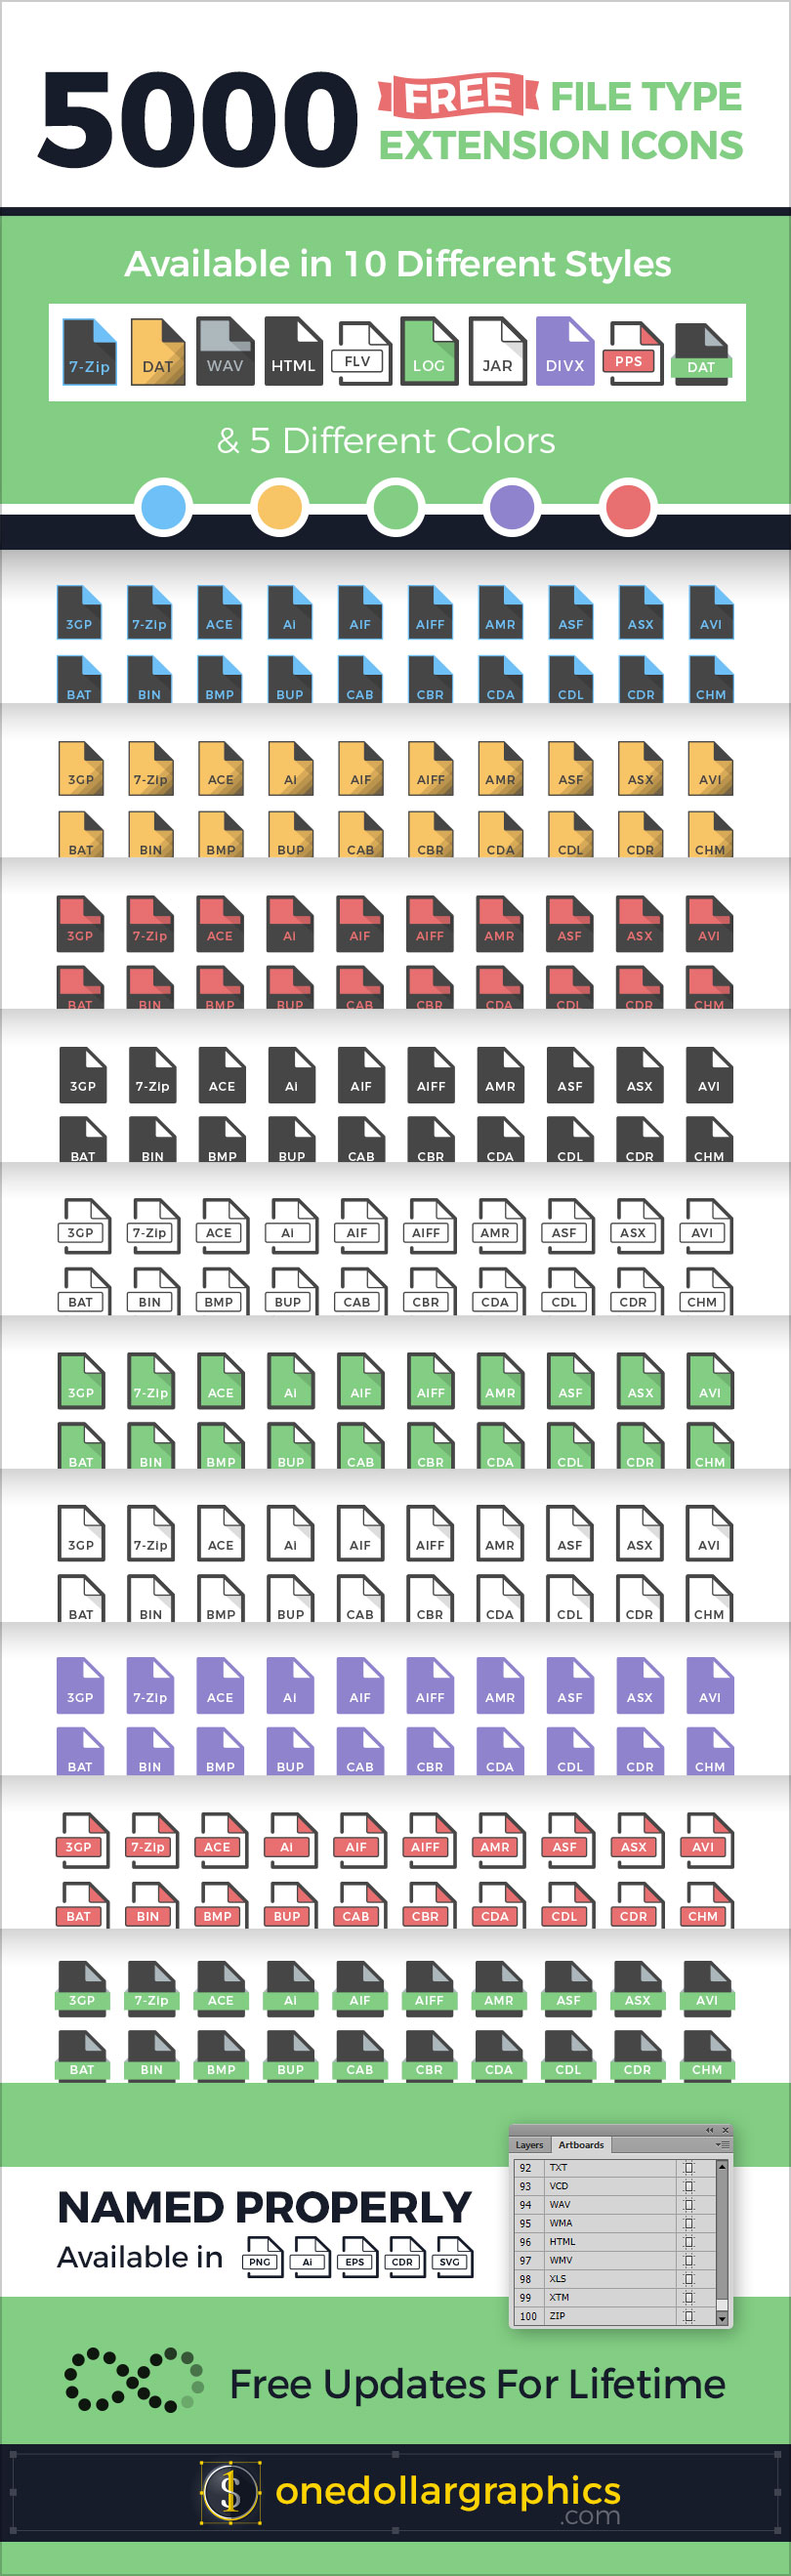 free-file-type-file-extension-icons-in-png-ai-eps-cdr-svg-4